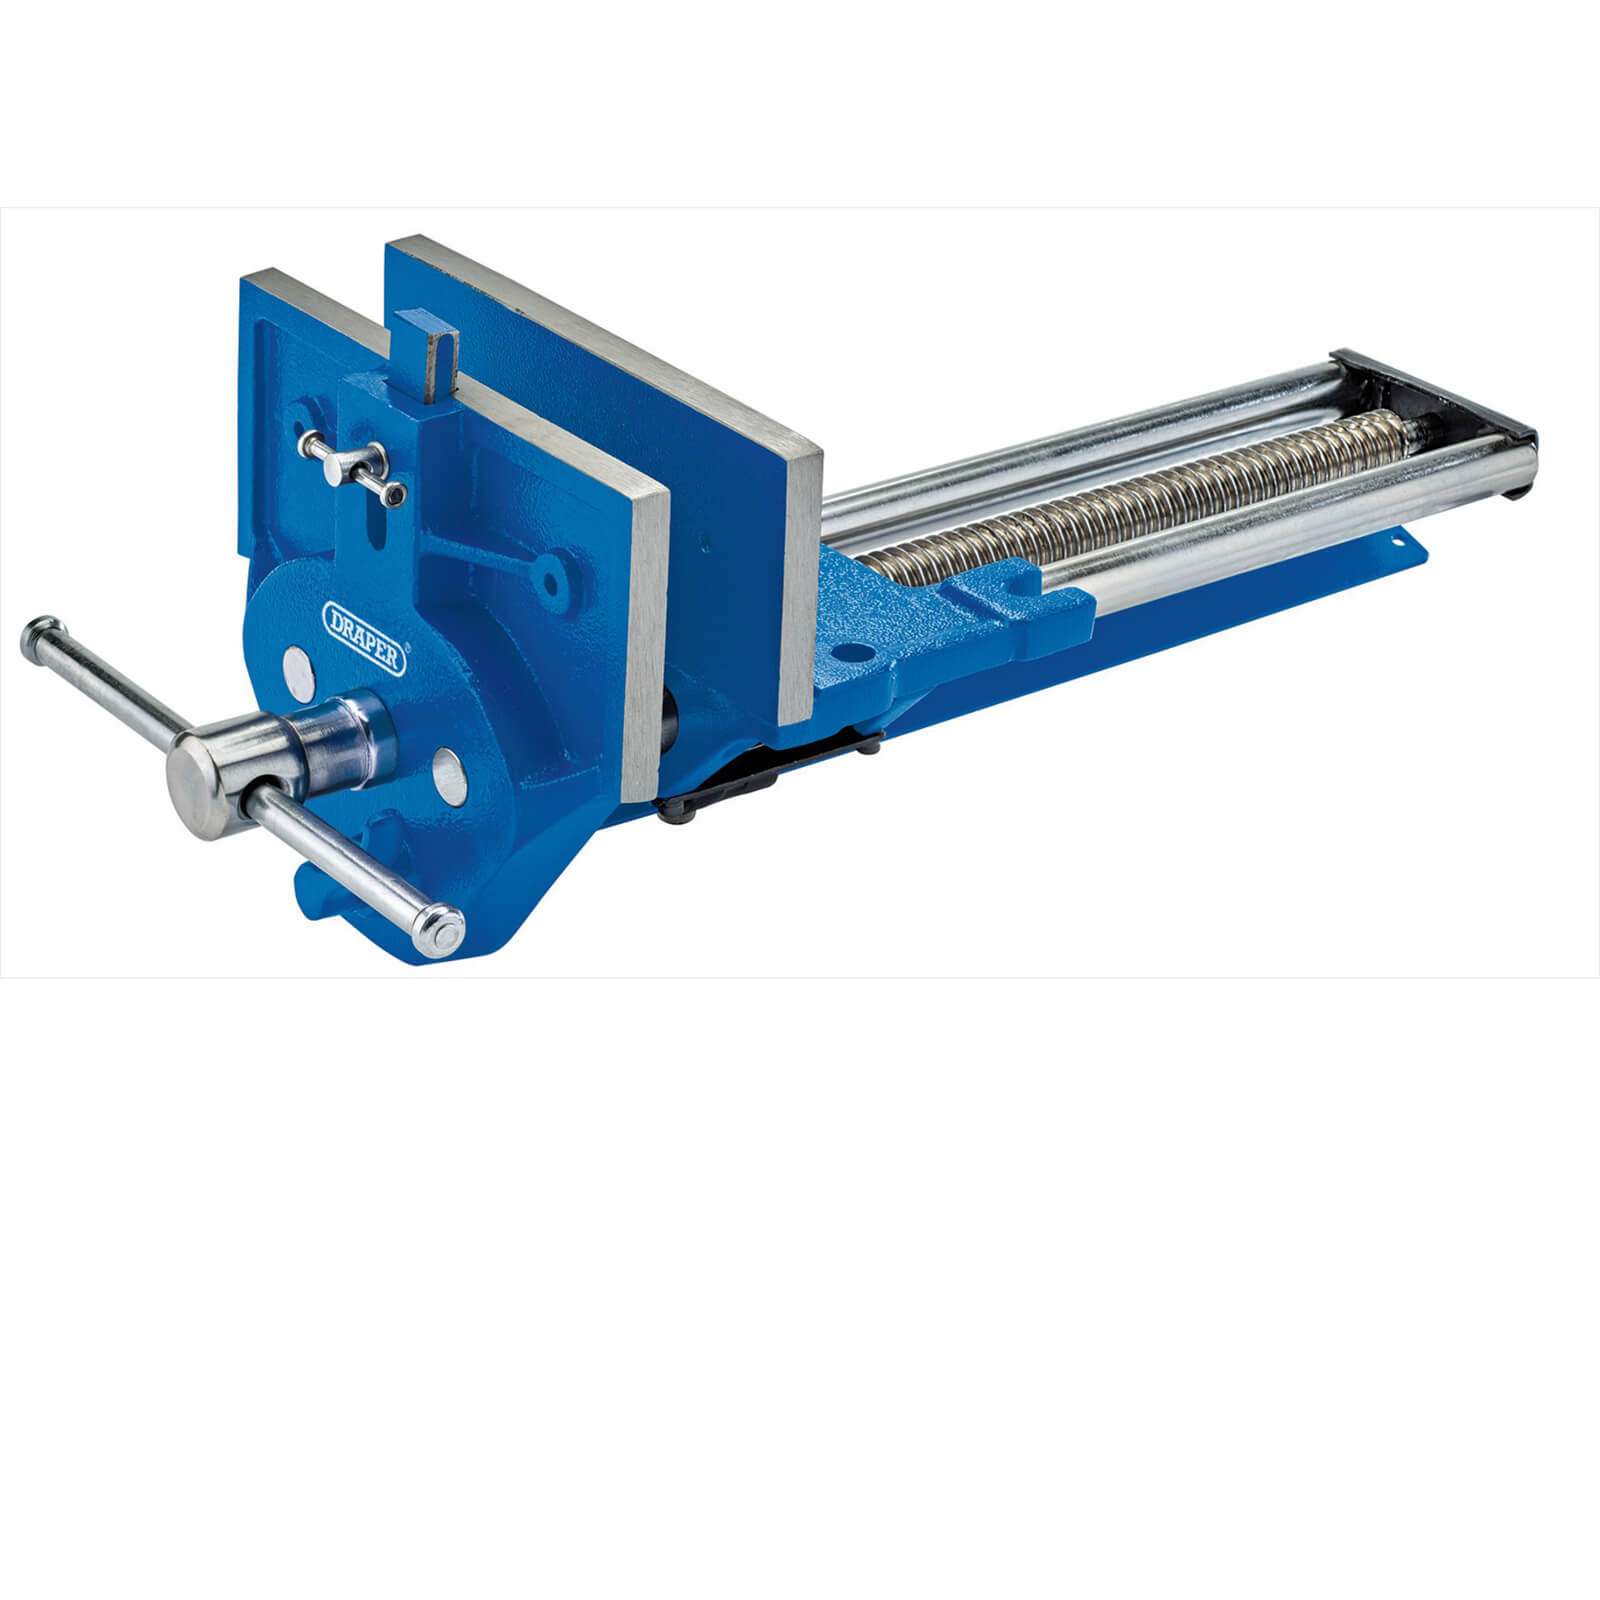 Image of Draper Quick Release Woodworking Bench Vice 225mm